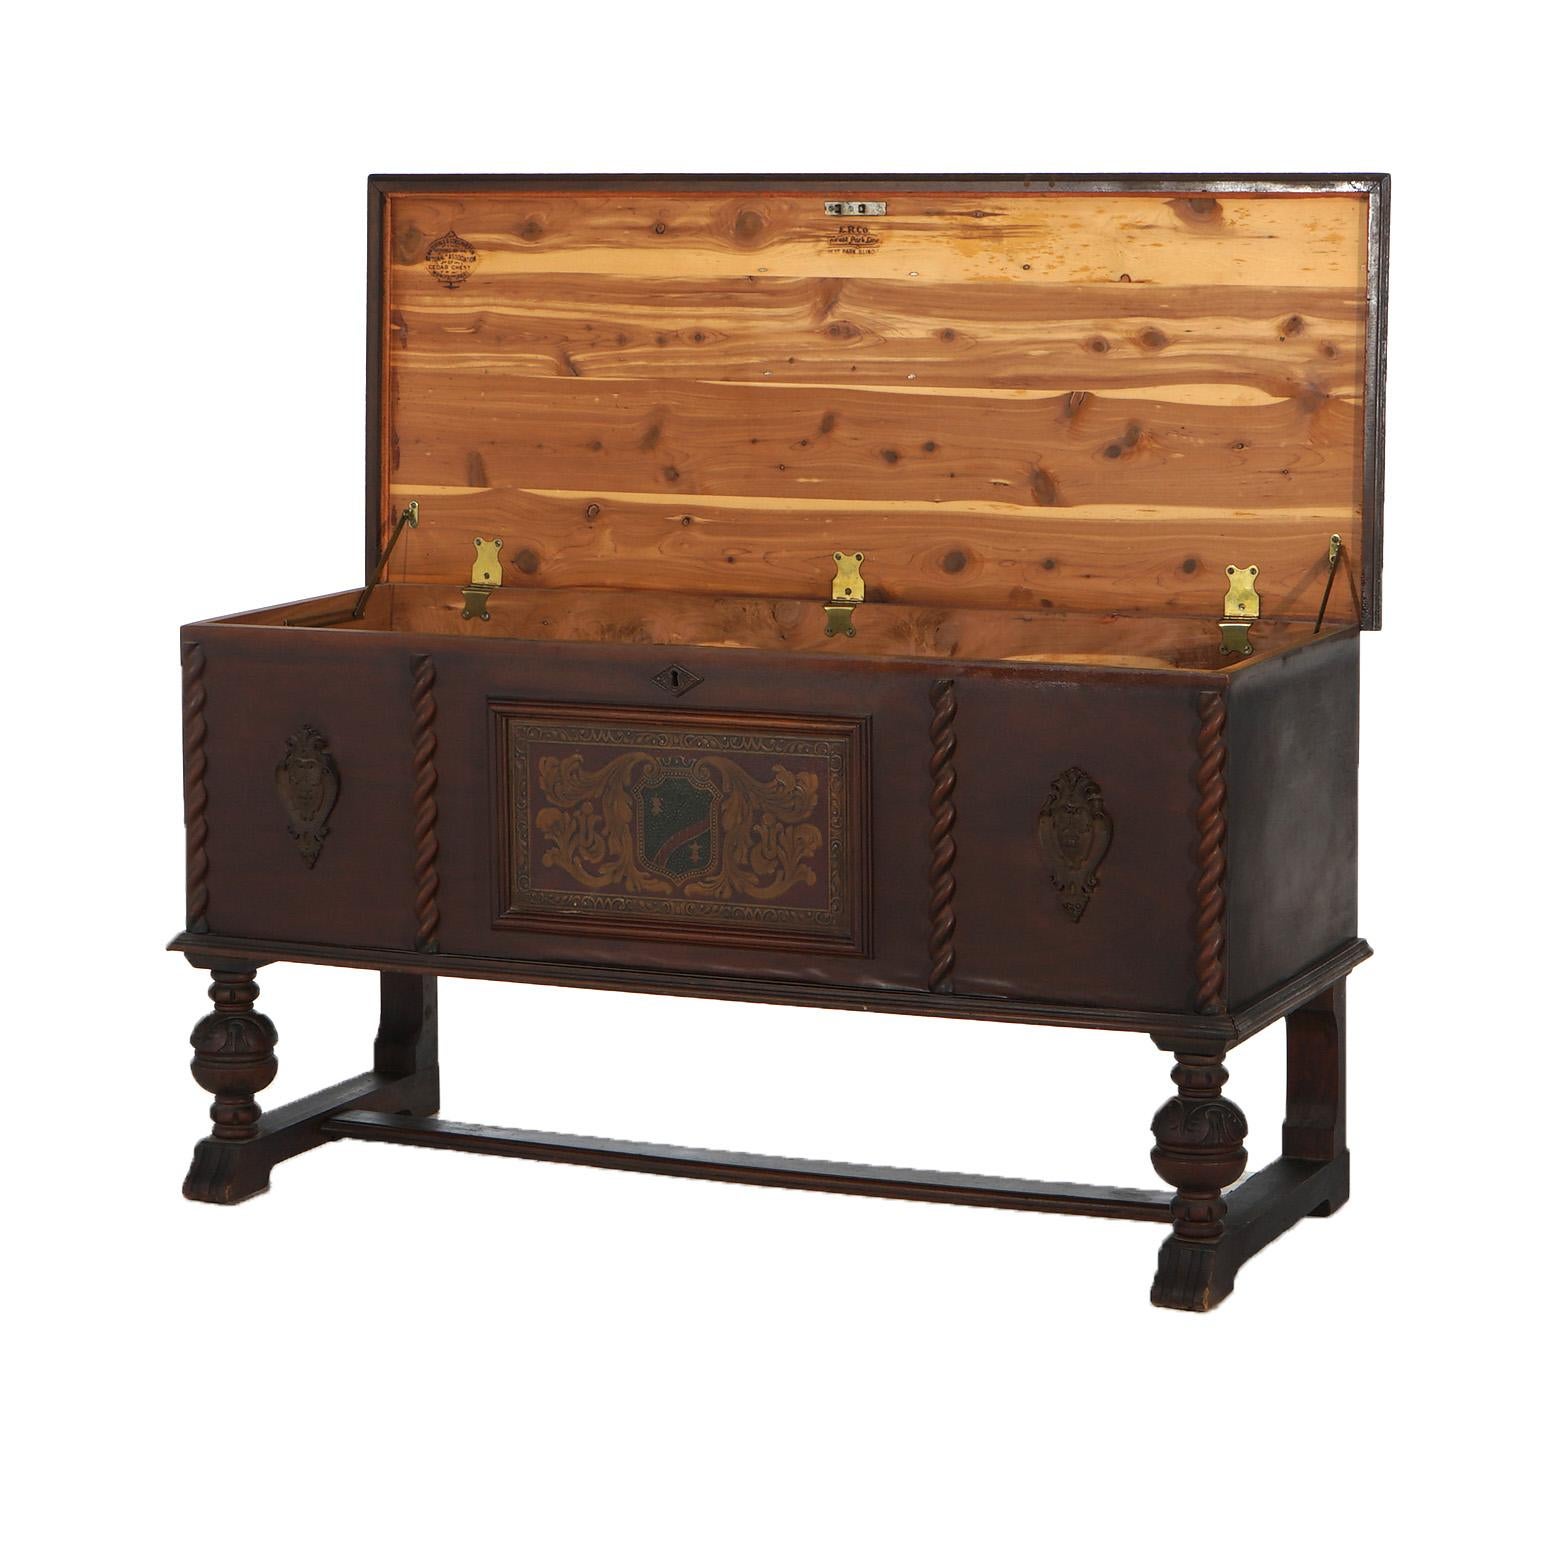 Antique Edwardian  Ed Roos Co. Carved Walnut & Cedar Lined Blanket Chest with Shield & Floral Decoration, Balustrade Legs, and Certificate C1930

Measures - 26h x 36w x 19d